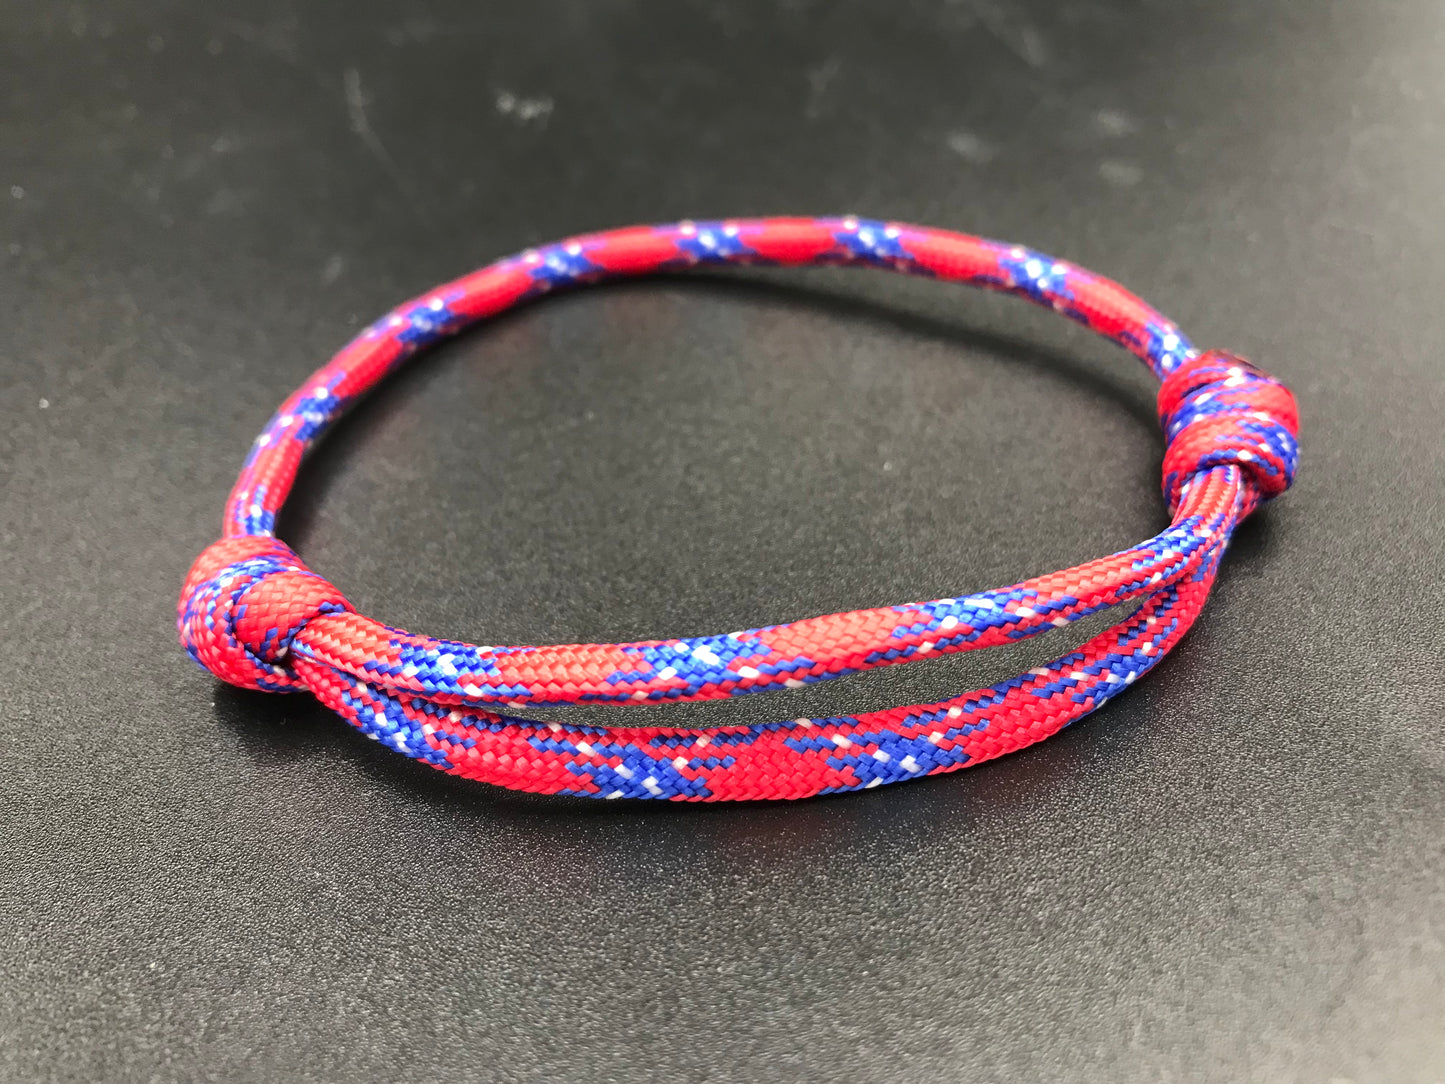 Paracord friendship bracelet in Texas red ( red, light blue white) like the Texas flag lightweight and fully adjustable 